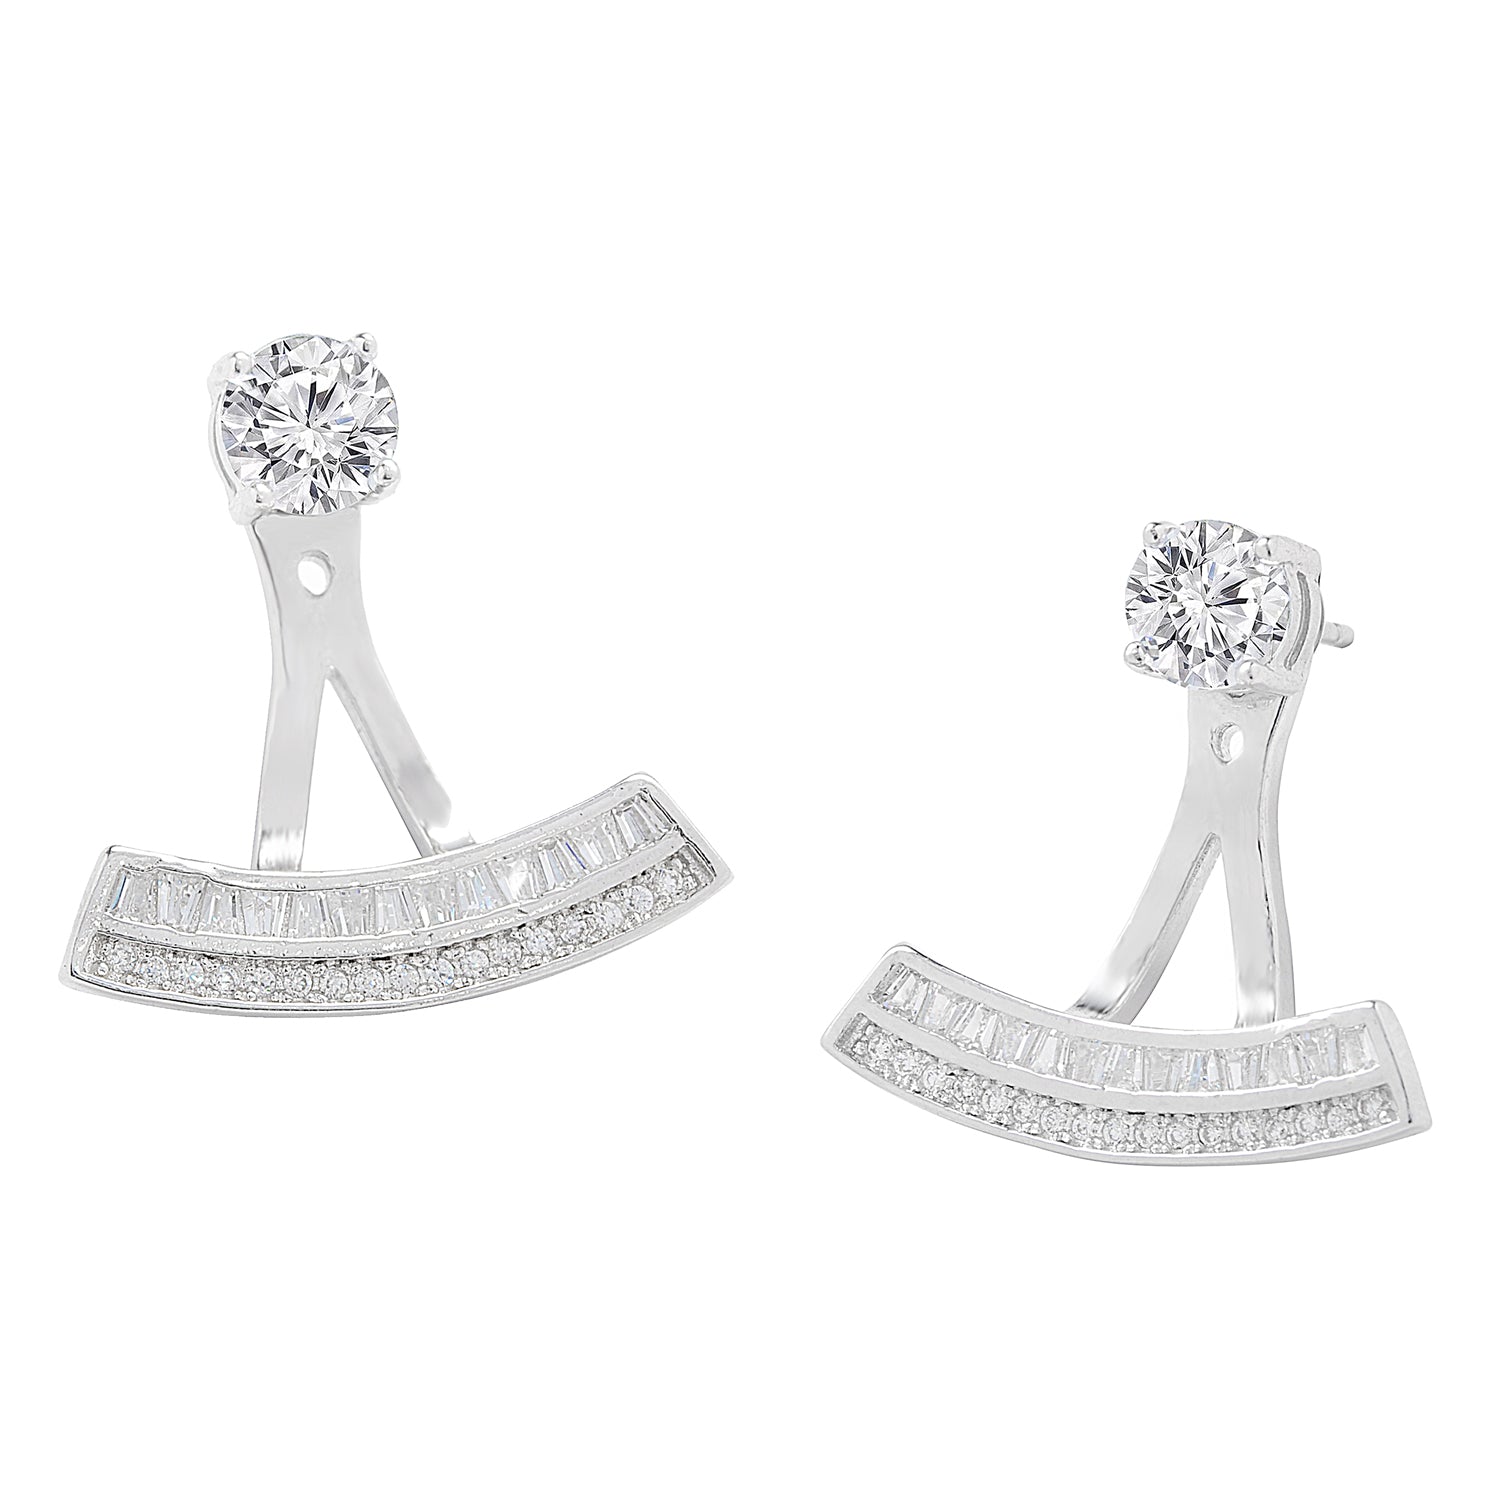 Aria 18k White Gold Plated Silver Drop Earrings with Simulated Diamond CZ Crystals